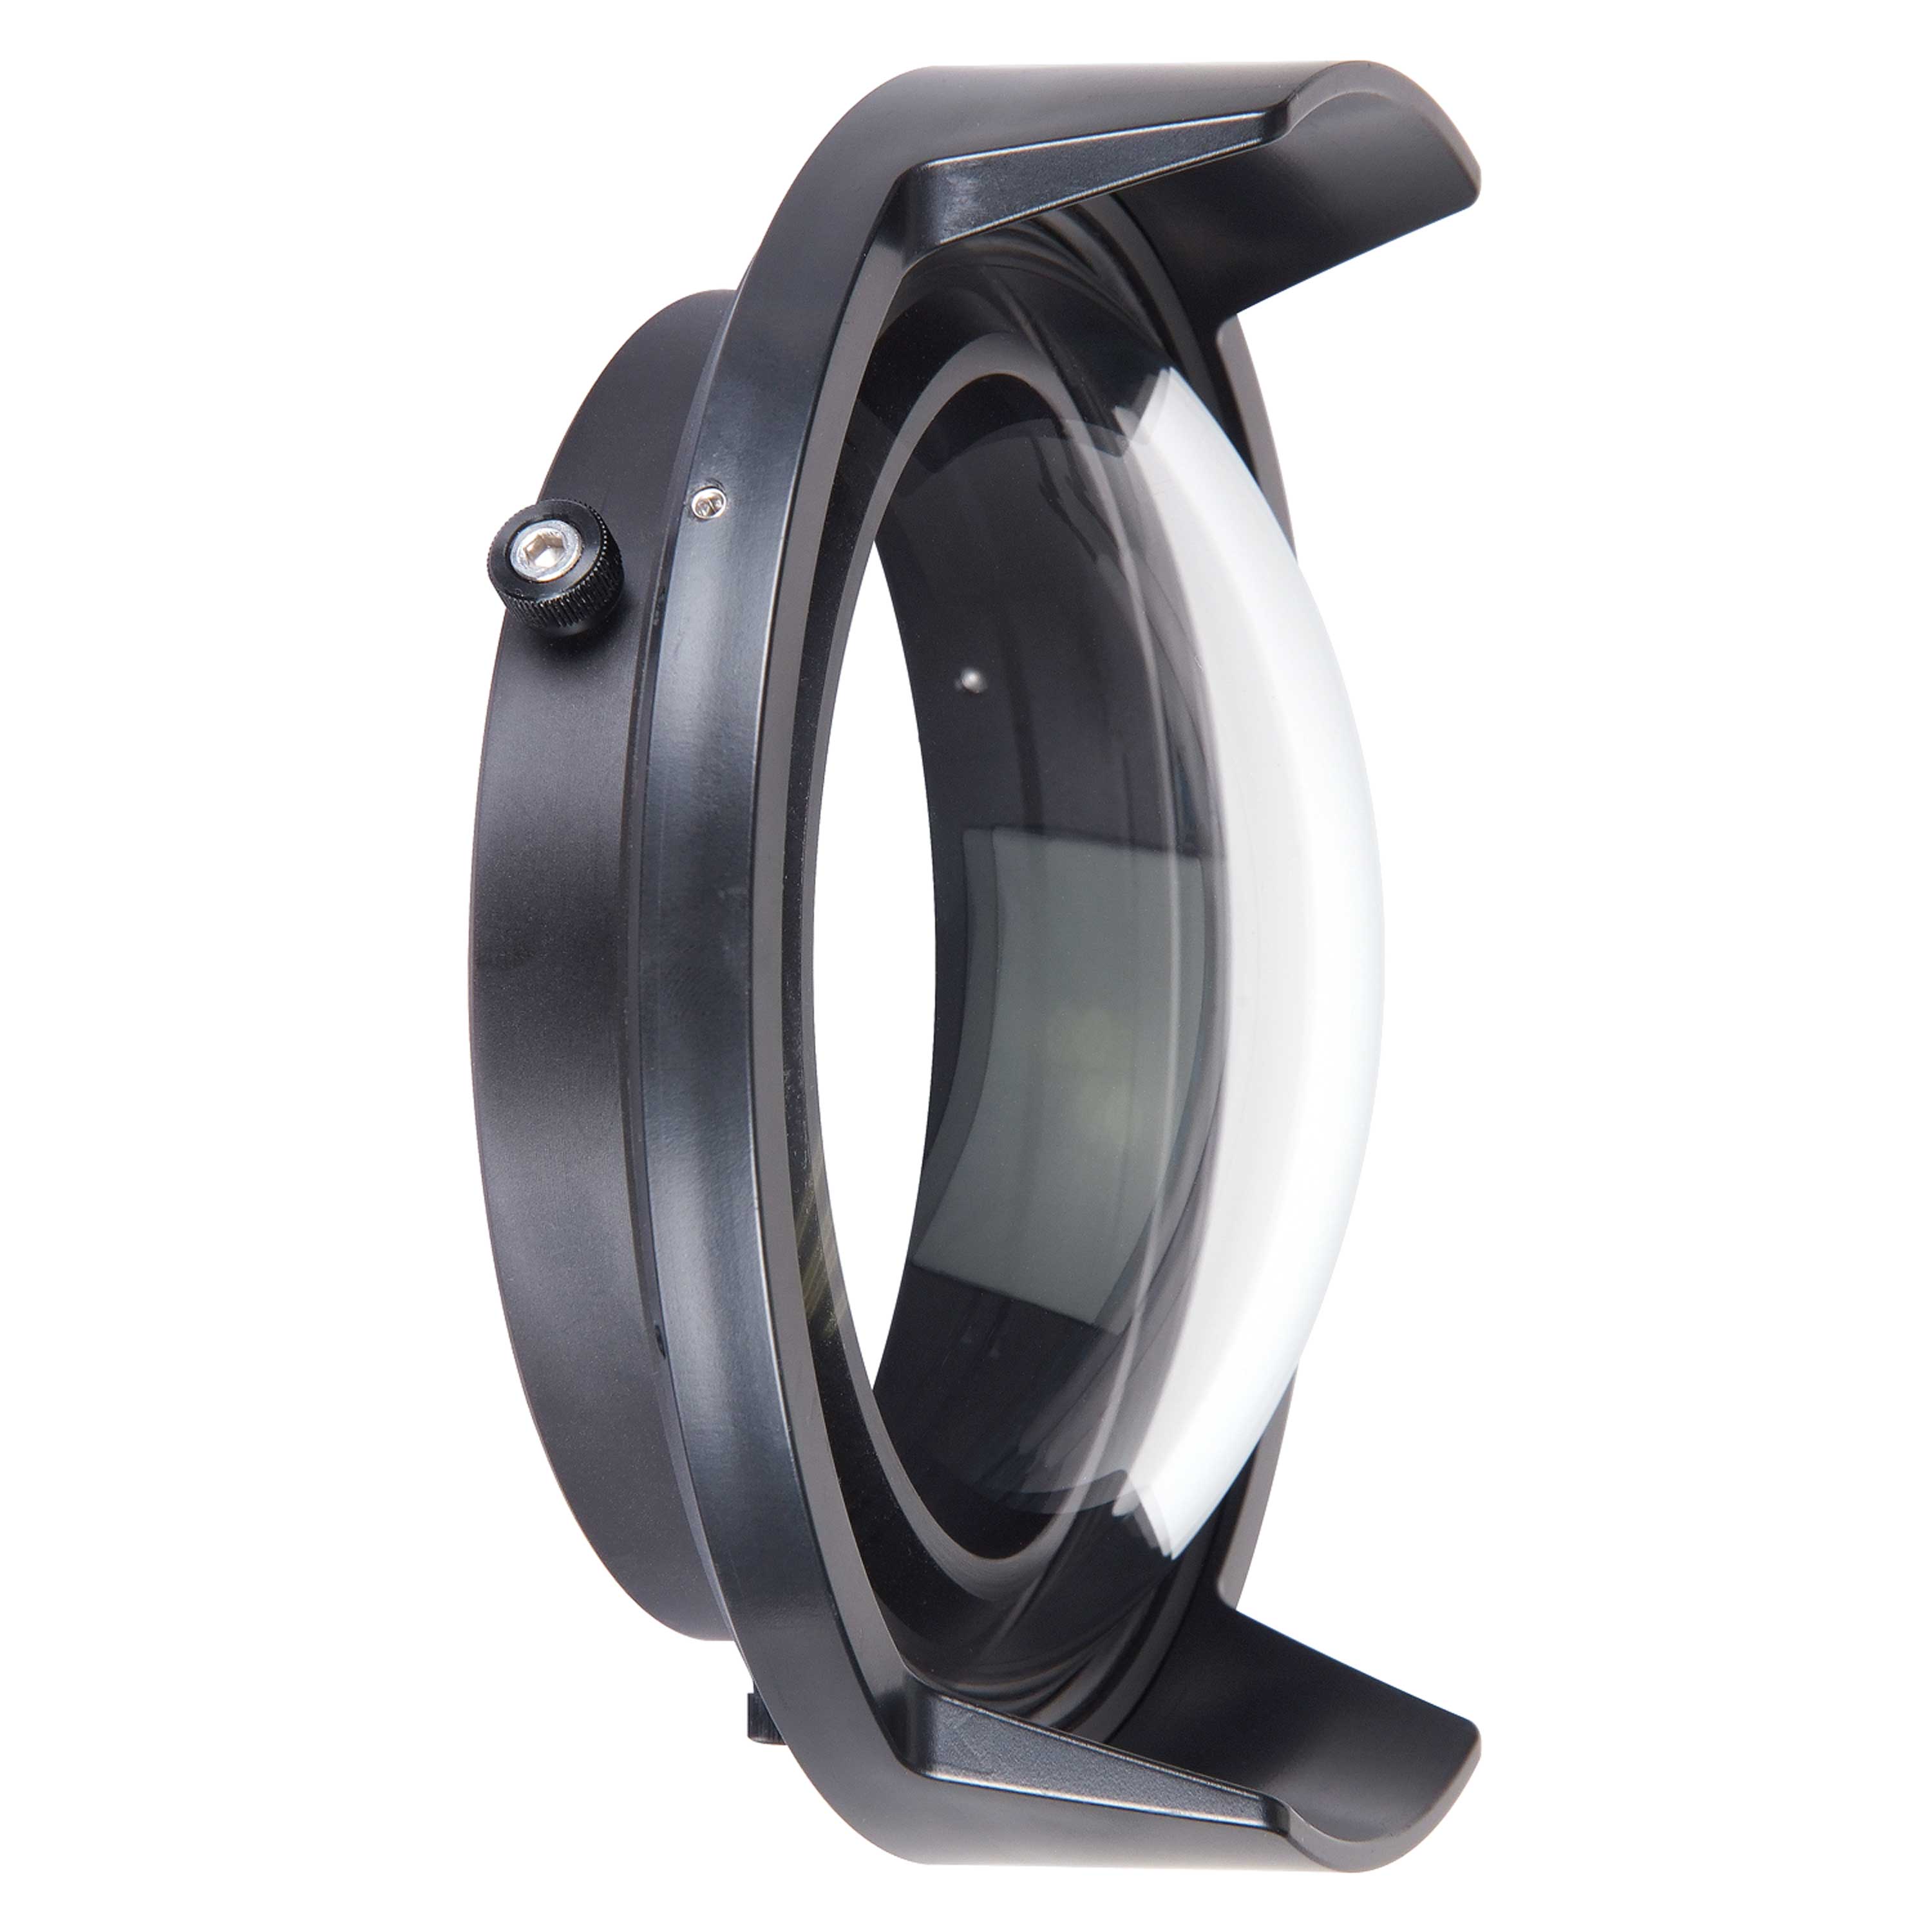 Clear Plastic Camera Dome - 6 inch - ON SALE